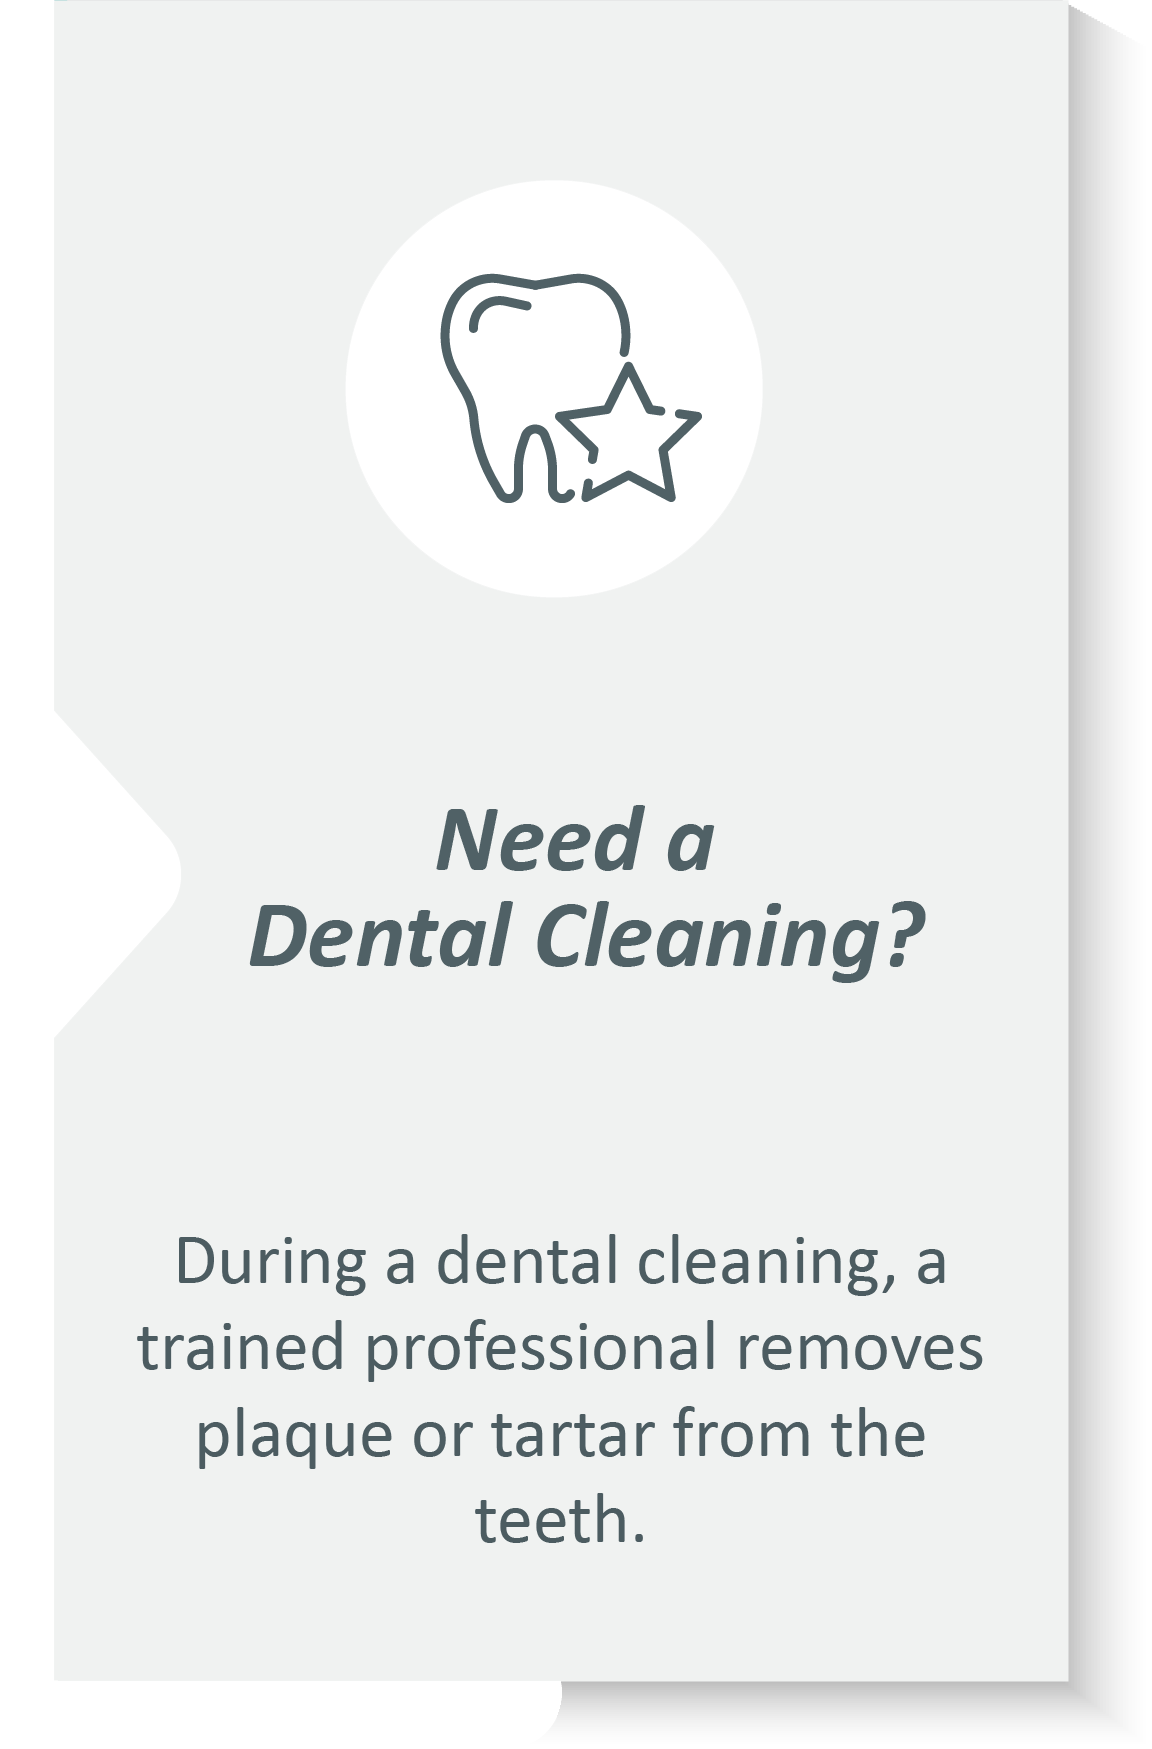 Dental cleaning infographic: During a dental cleaning, a trained professional removes plaque or tartar from the teeth.